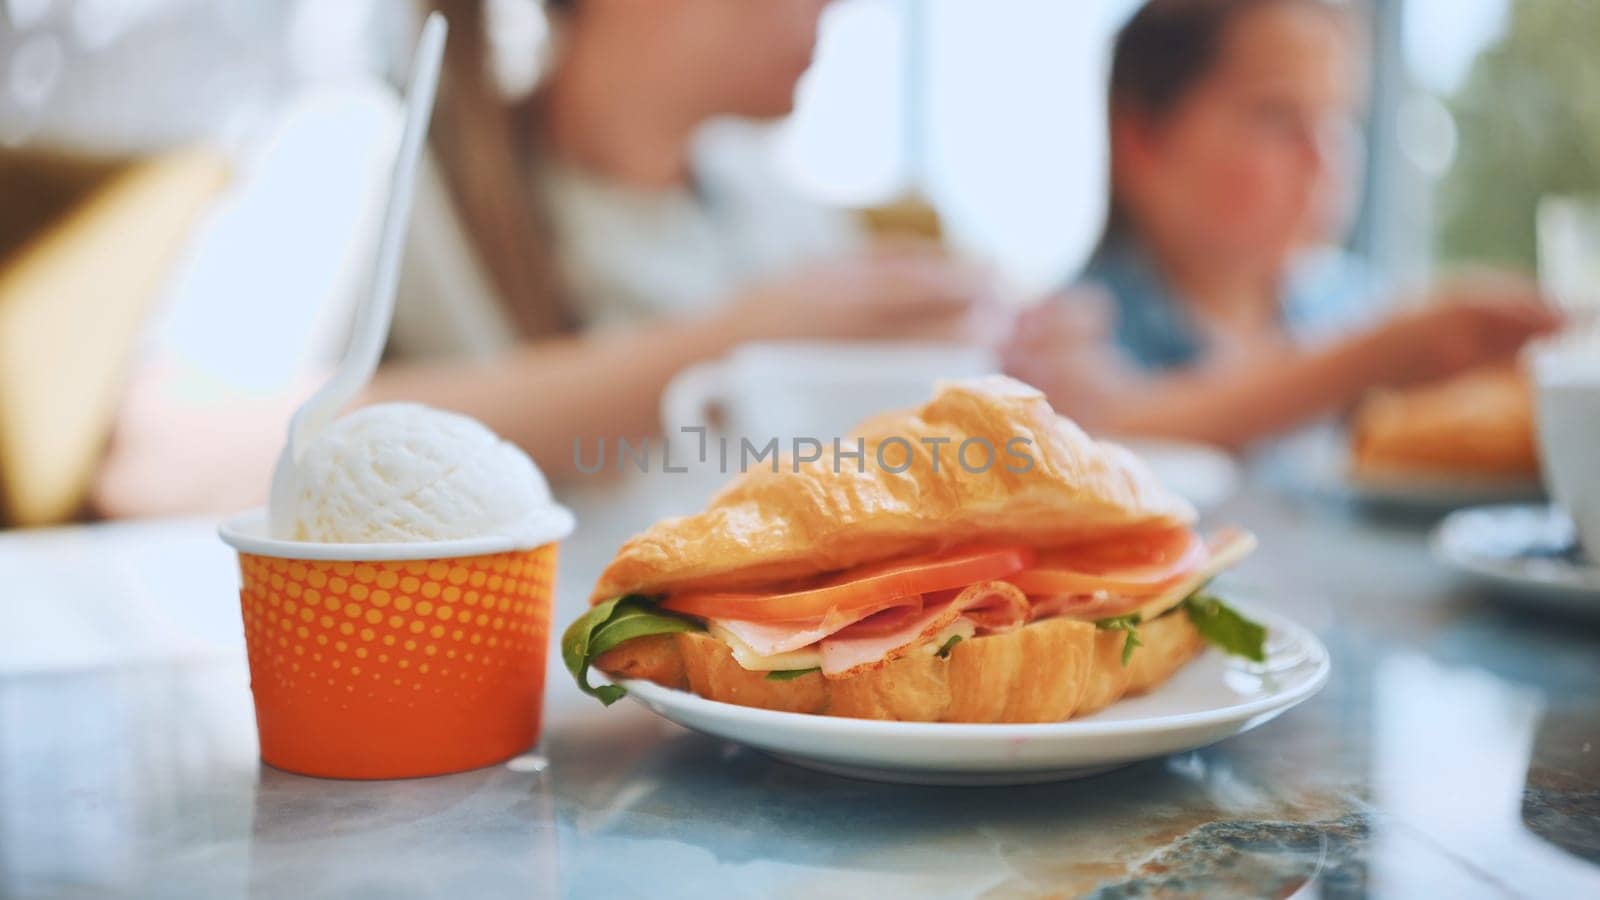 Ice cream and croissant with meat against the background of people eating in the cafe